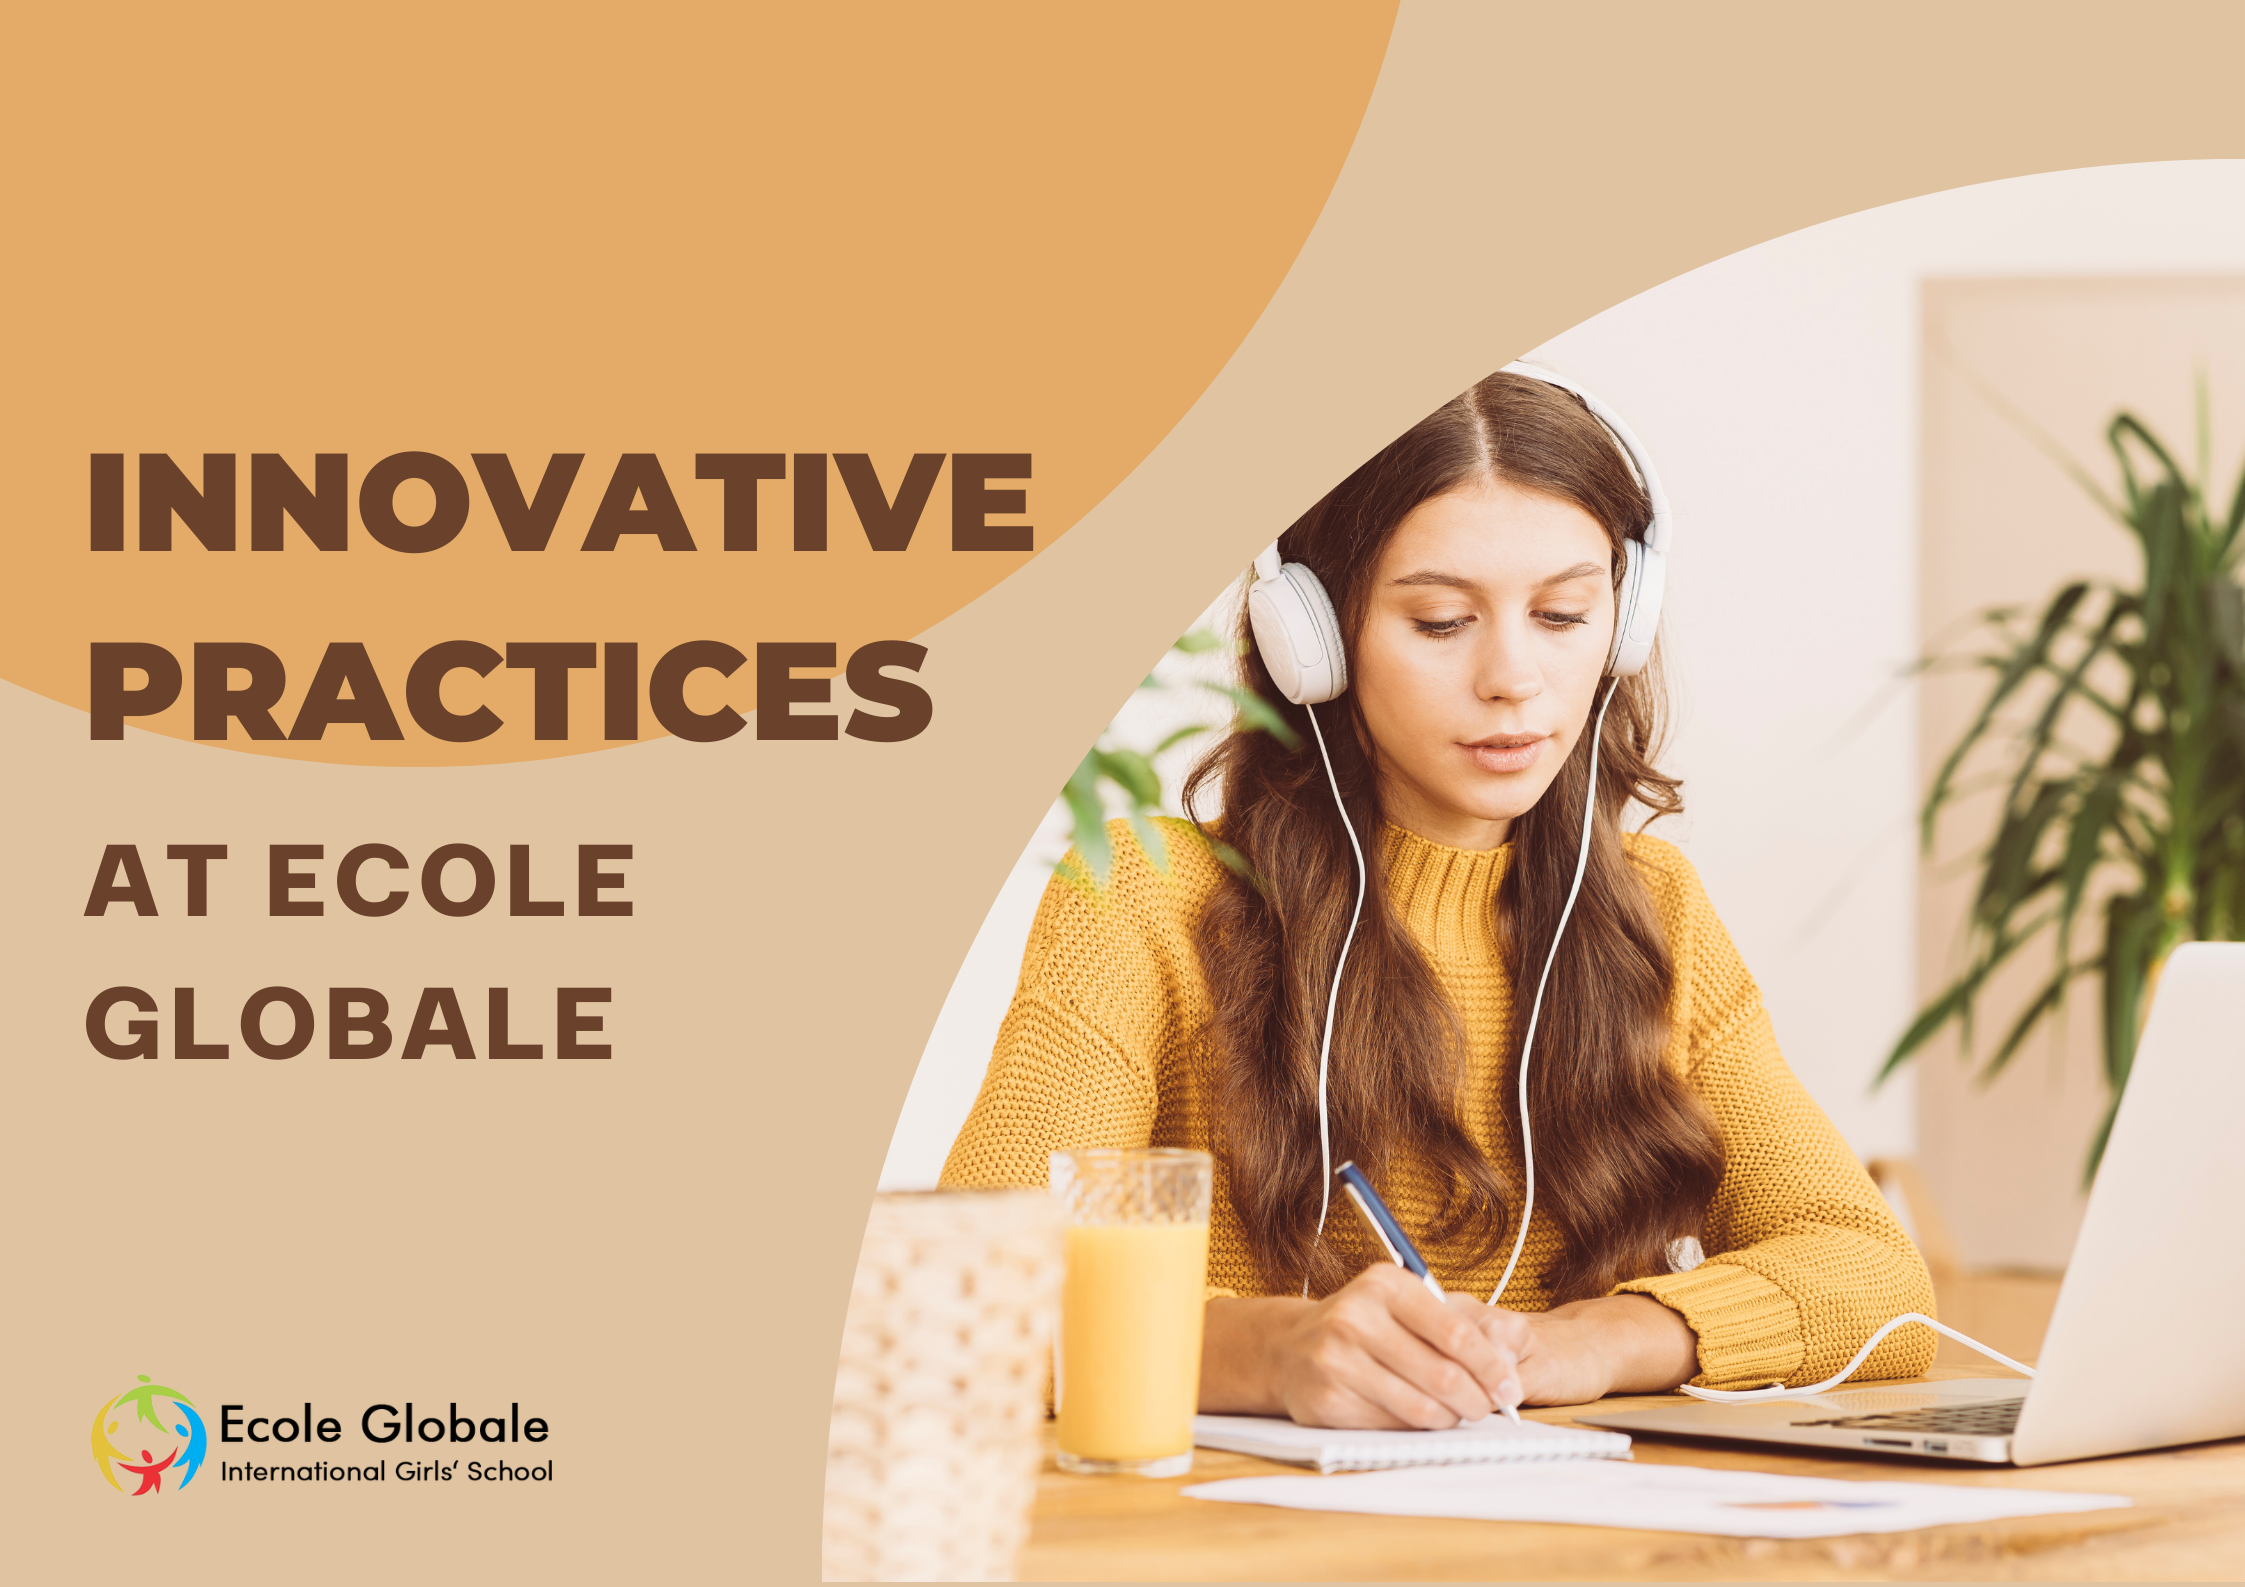 You are currently viewing The Future of Learning: Innovative Practices at Ecole Globale